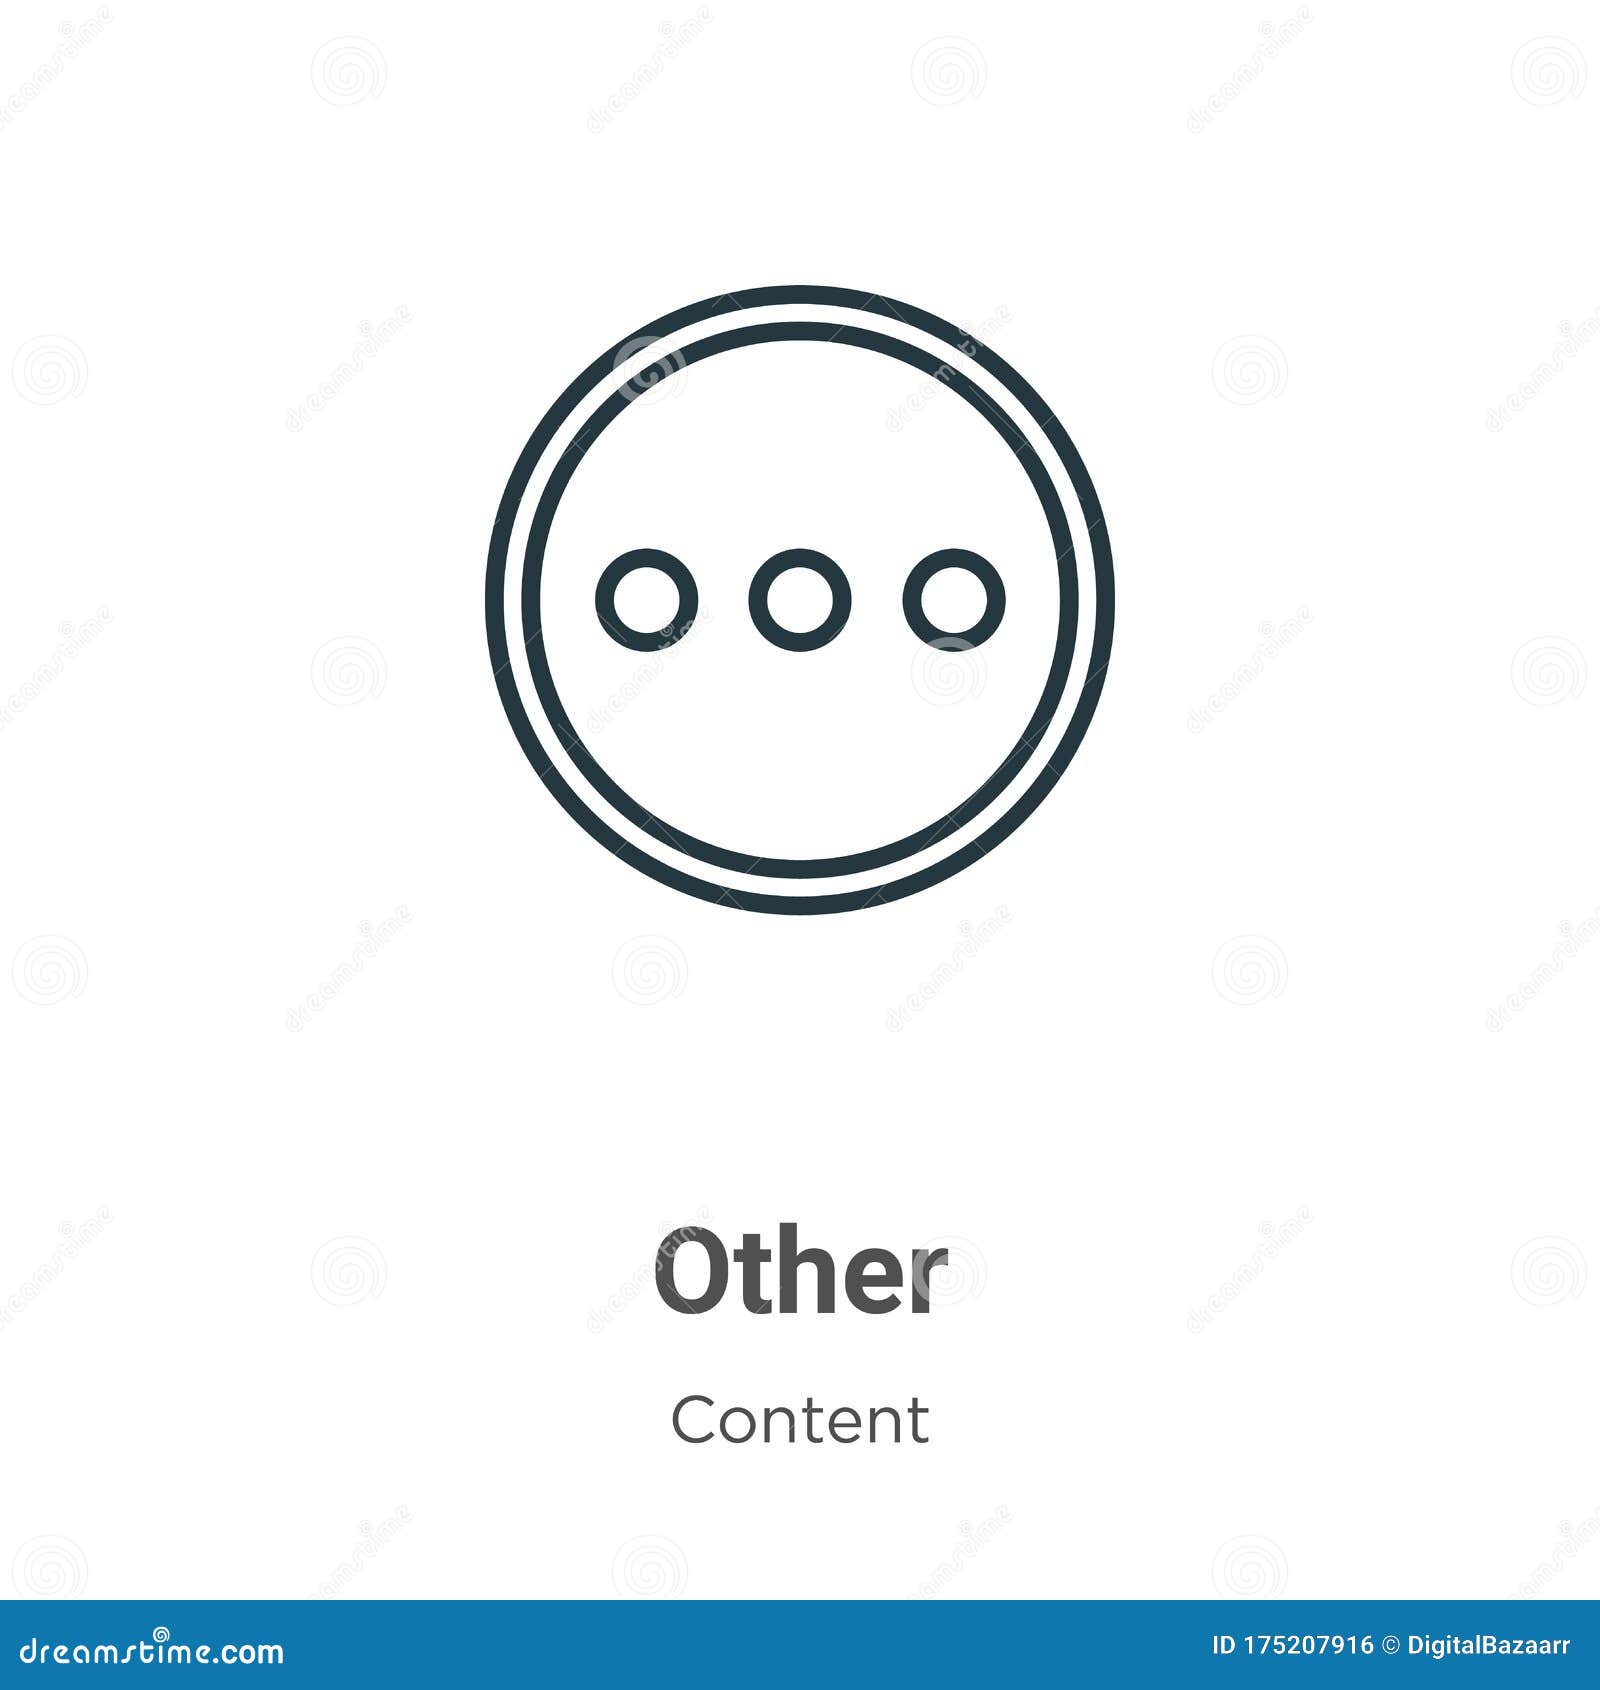 other outline  icon. thin line black other icon, flat  simple   from editable content concept